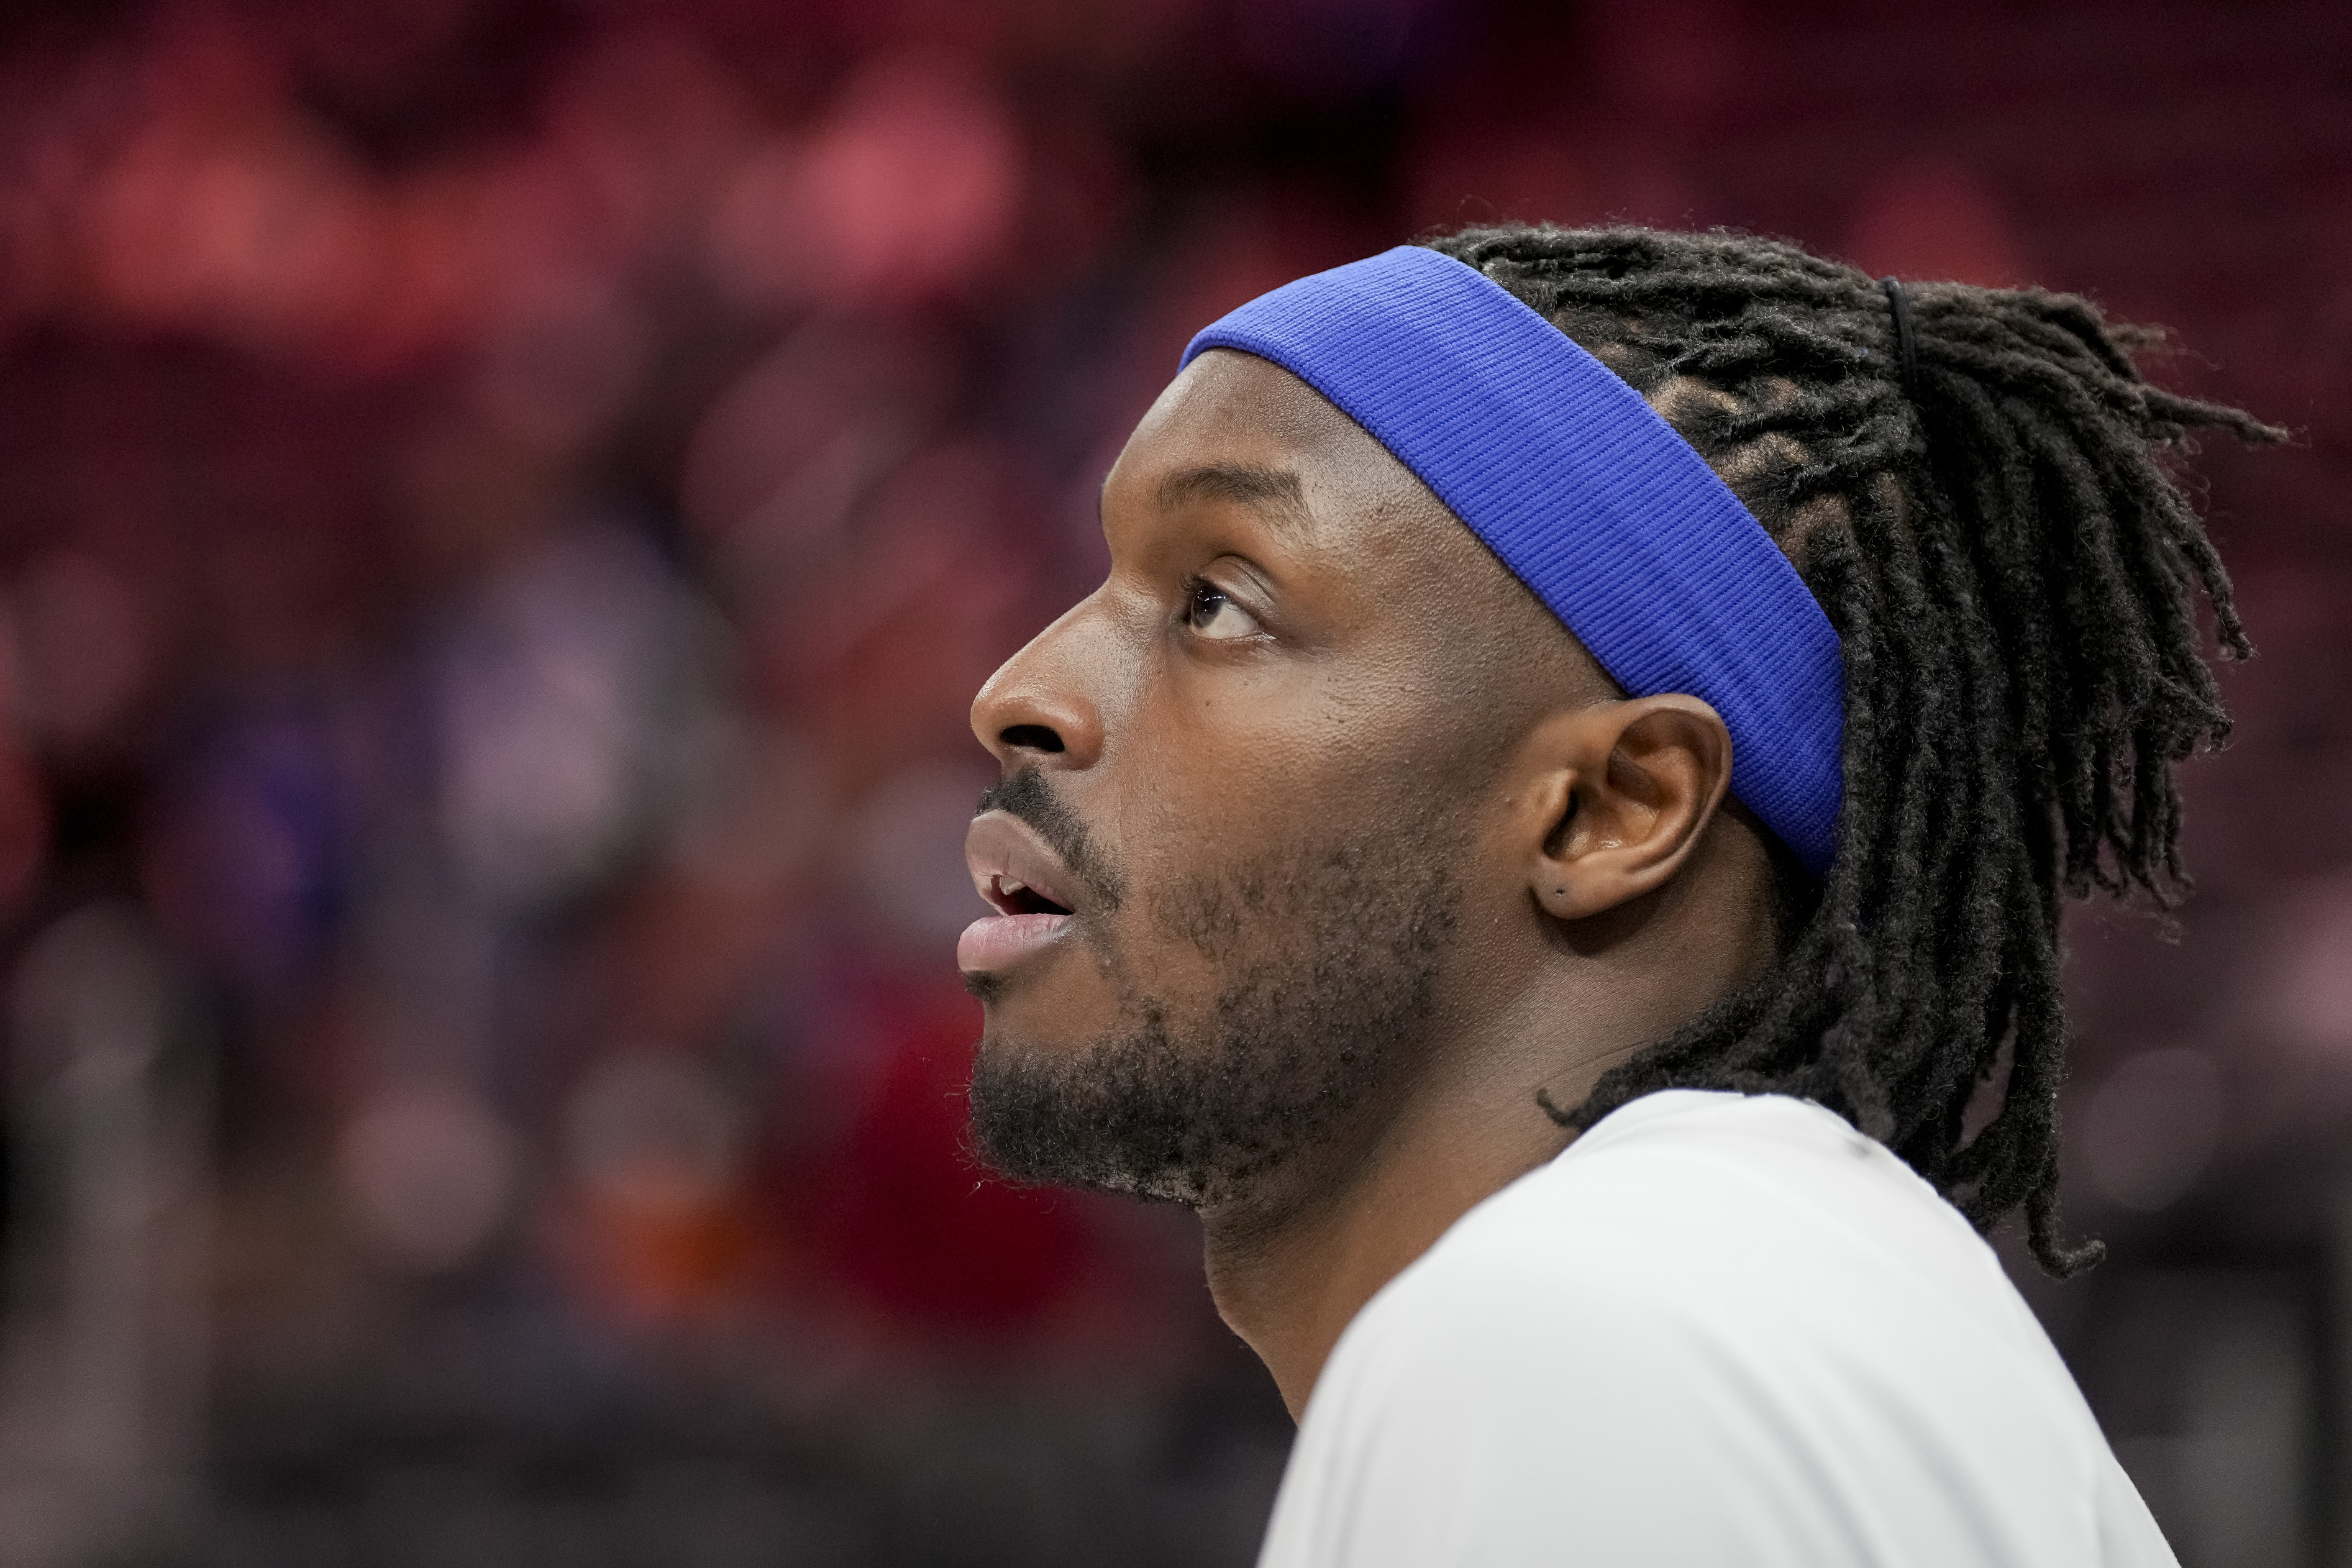 Mike Scott suggests Nike will not allow players to wear ninja-style  headbands